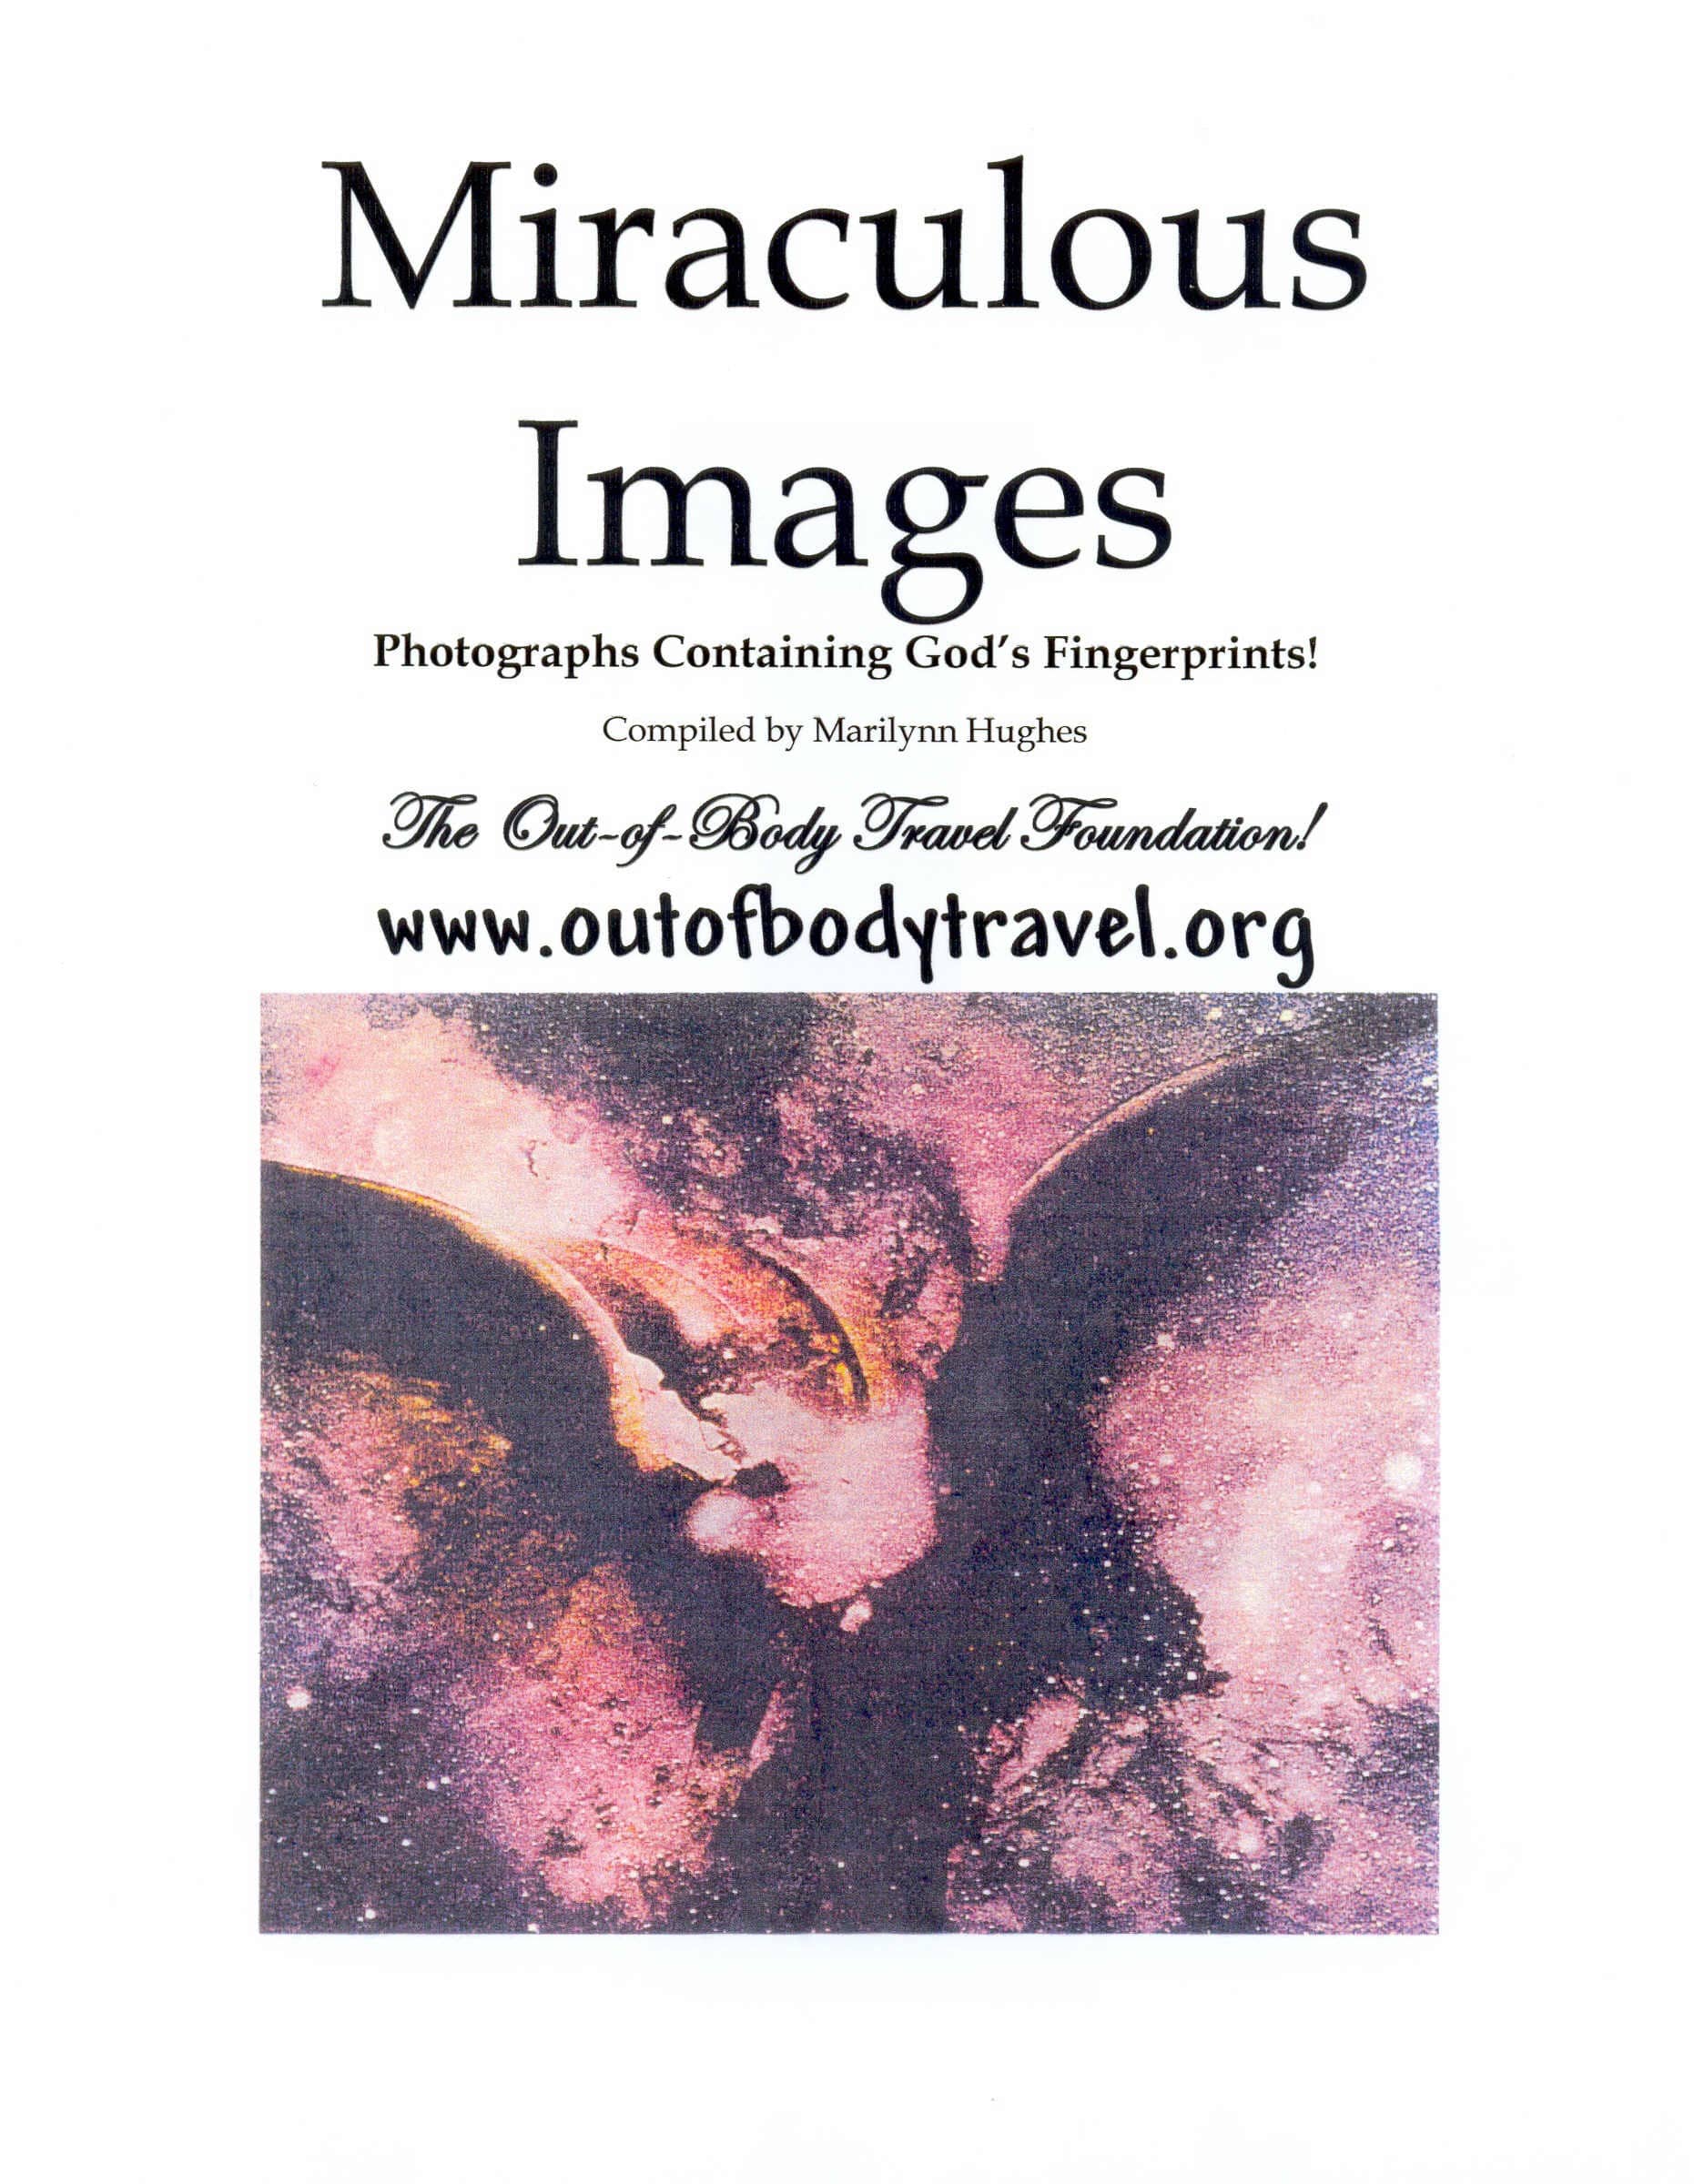 Photographs Containing God's Fingerprints - Miraculous Images, Illuminated Manuscripts, Tree of Life, Apparitions of Mary and Jesus - An Out-of-Body Travel Book